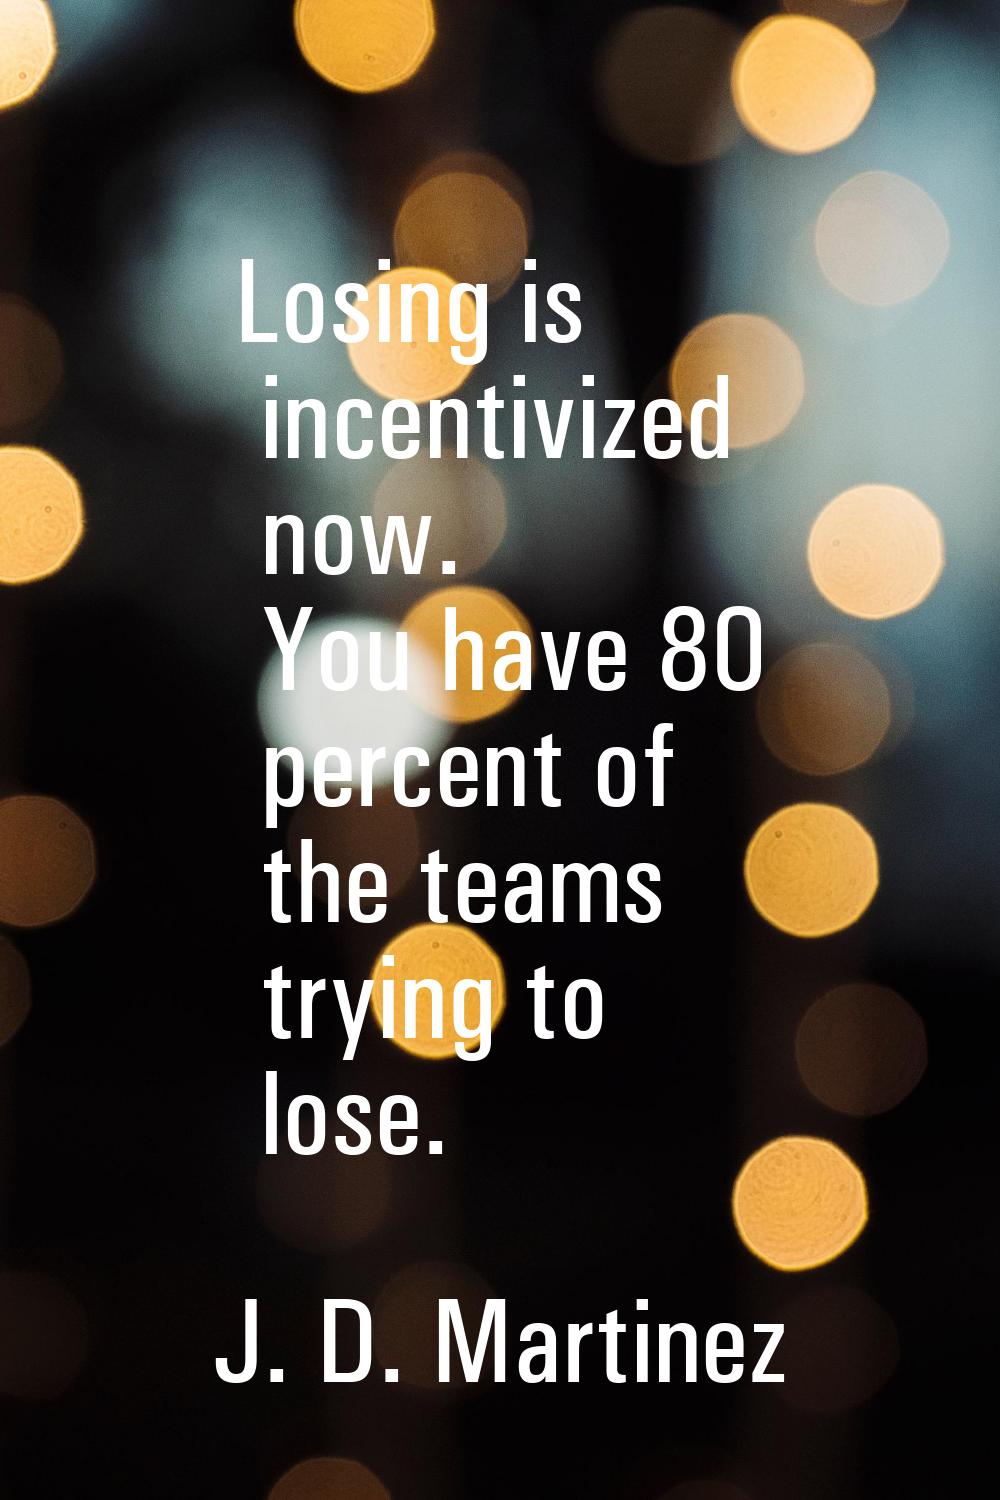 Losing is incentivized now. You have 80 percent of the teams trying to lose.